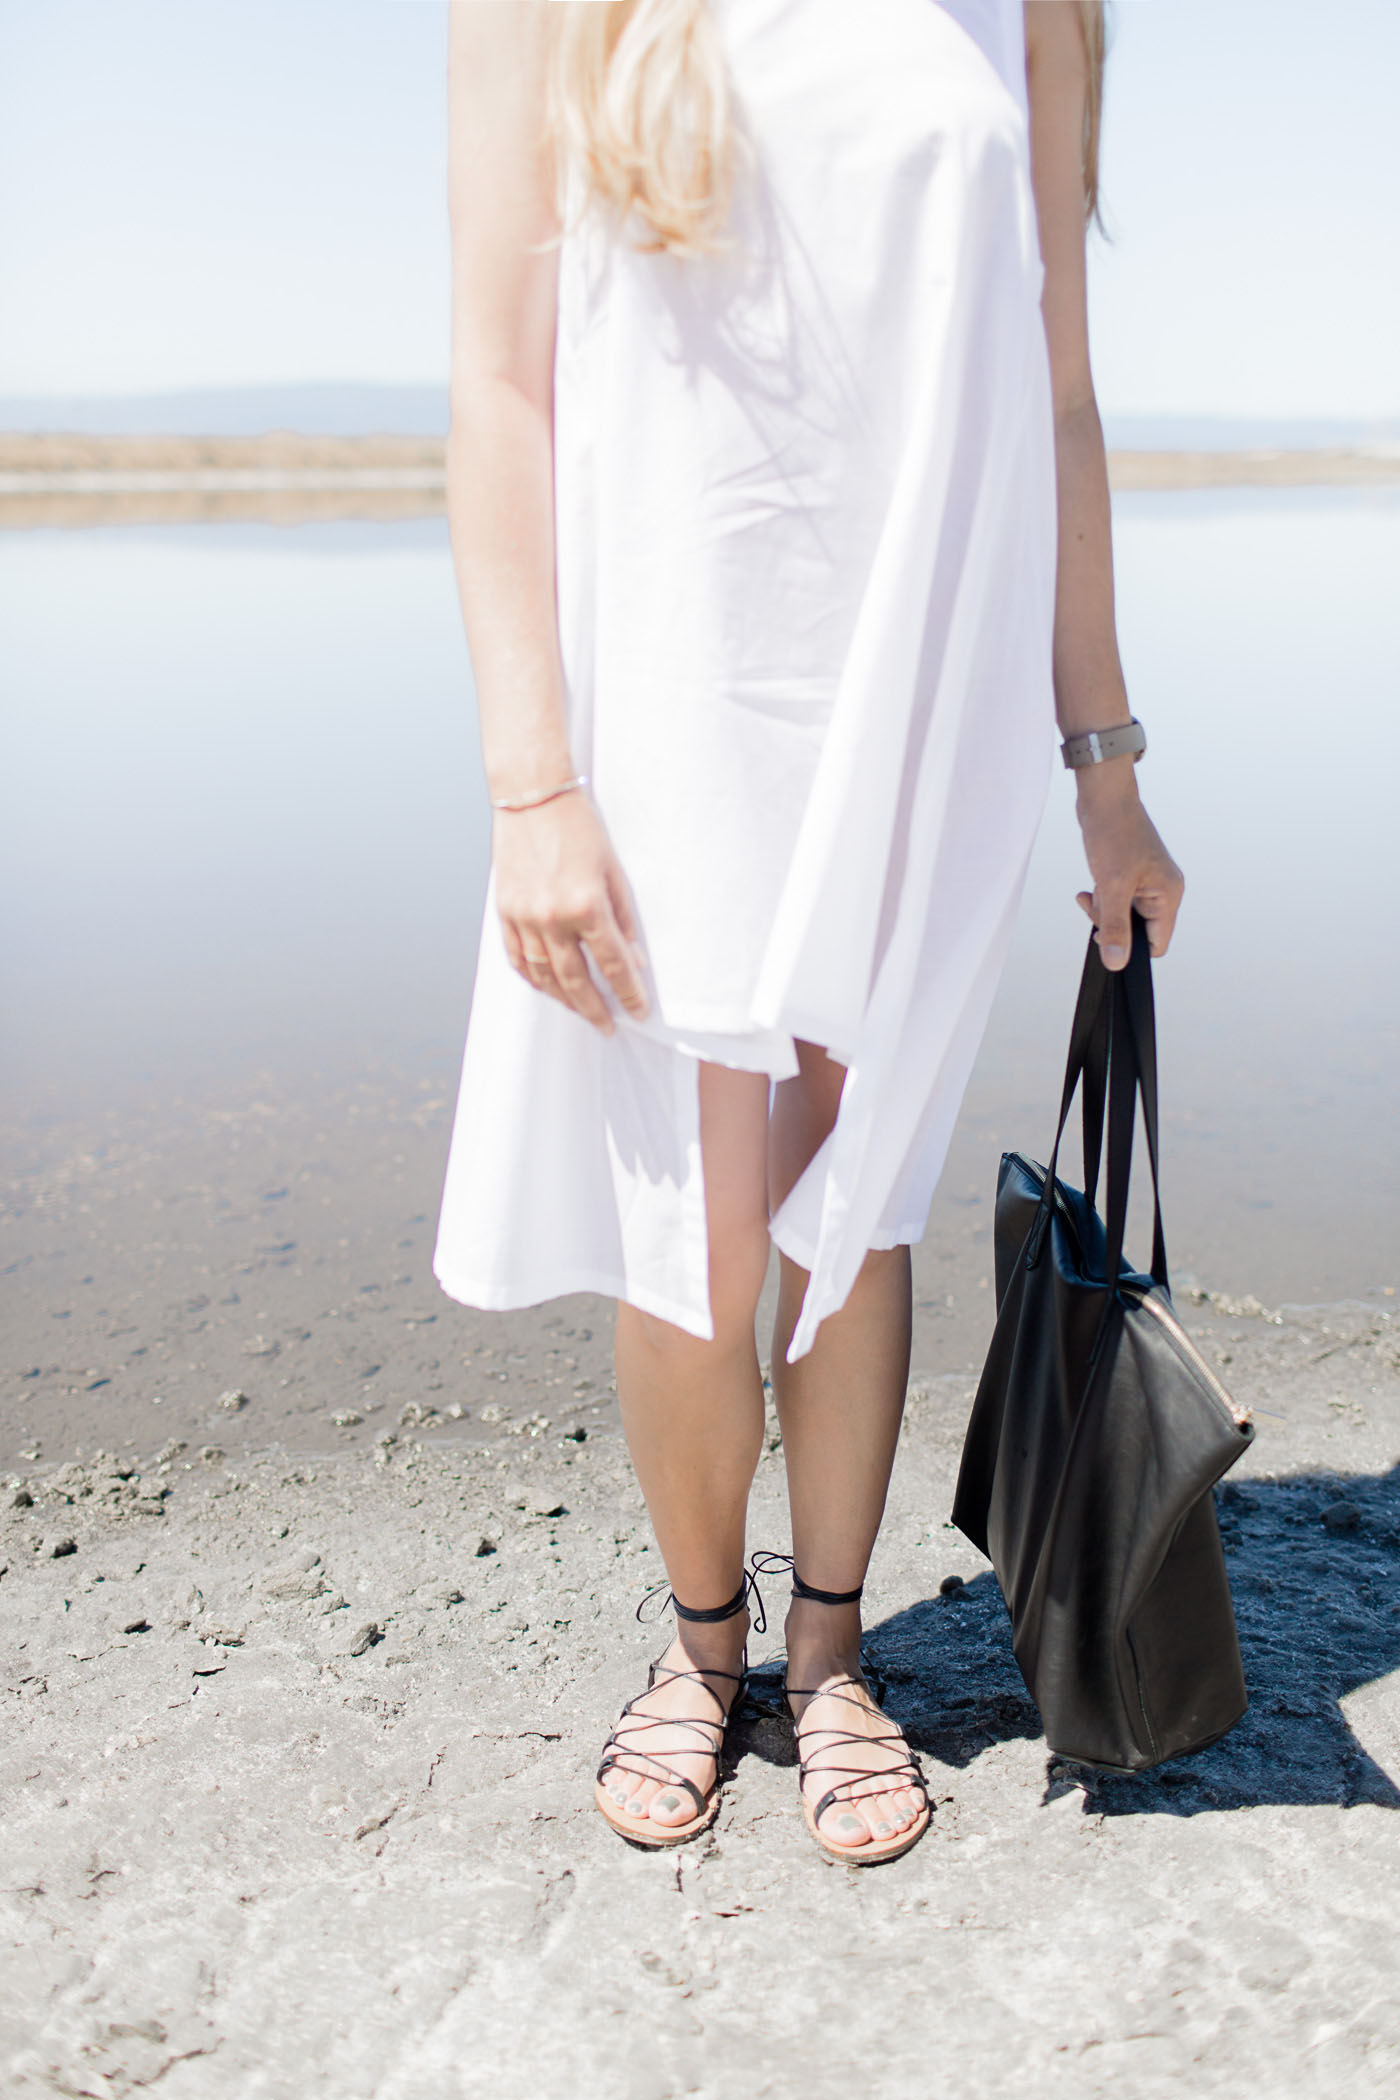 Summer casual outfit. Beach chic in Cuyana Sun Hat and Swim Cover-Up